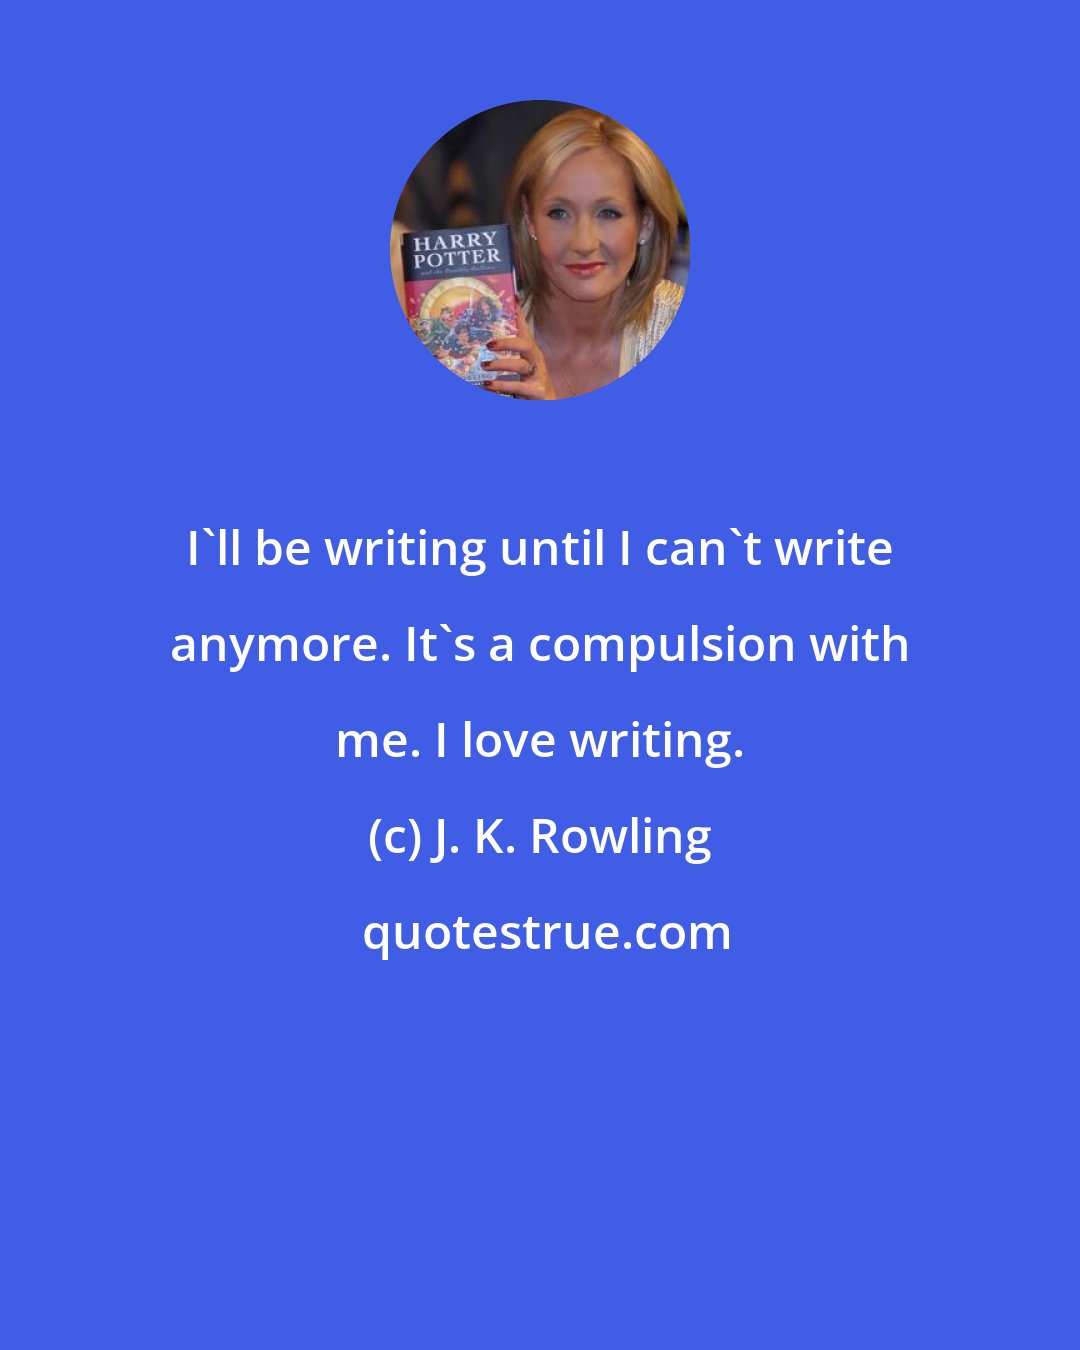 J. K. Rowling: I'll be writing until I can't write anymore. It's a compulsion with me. I love writing.